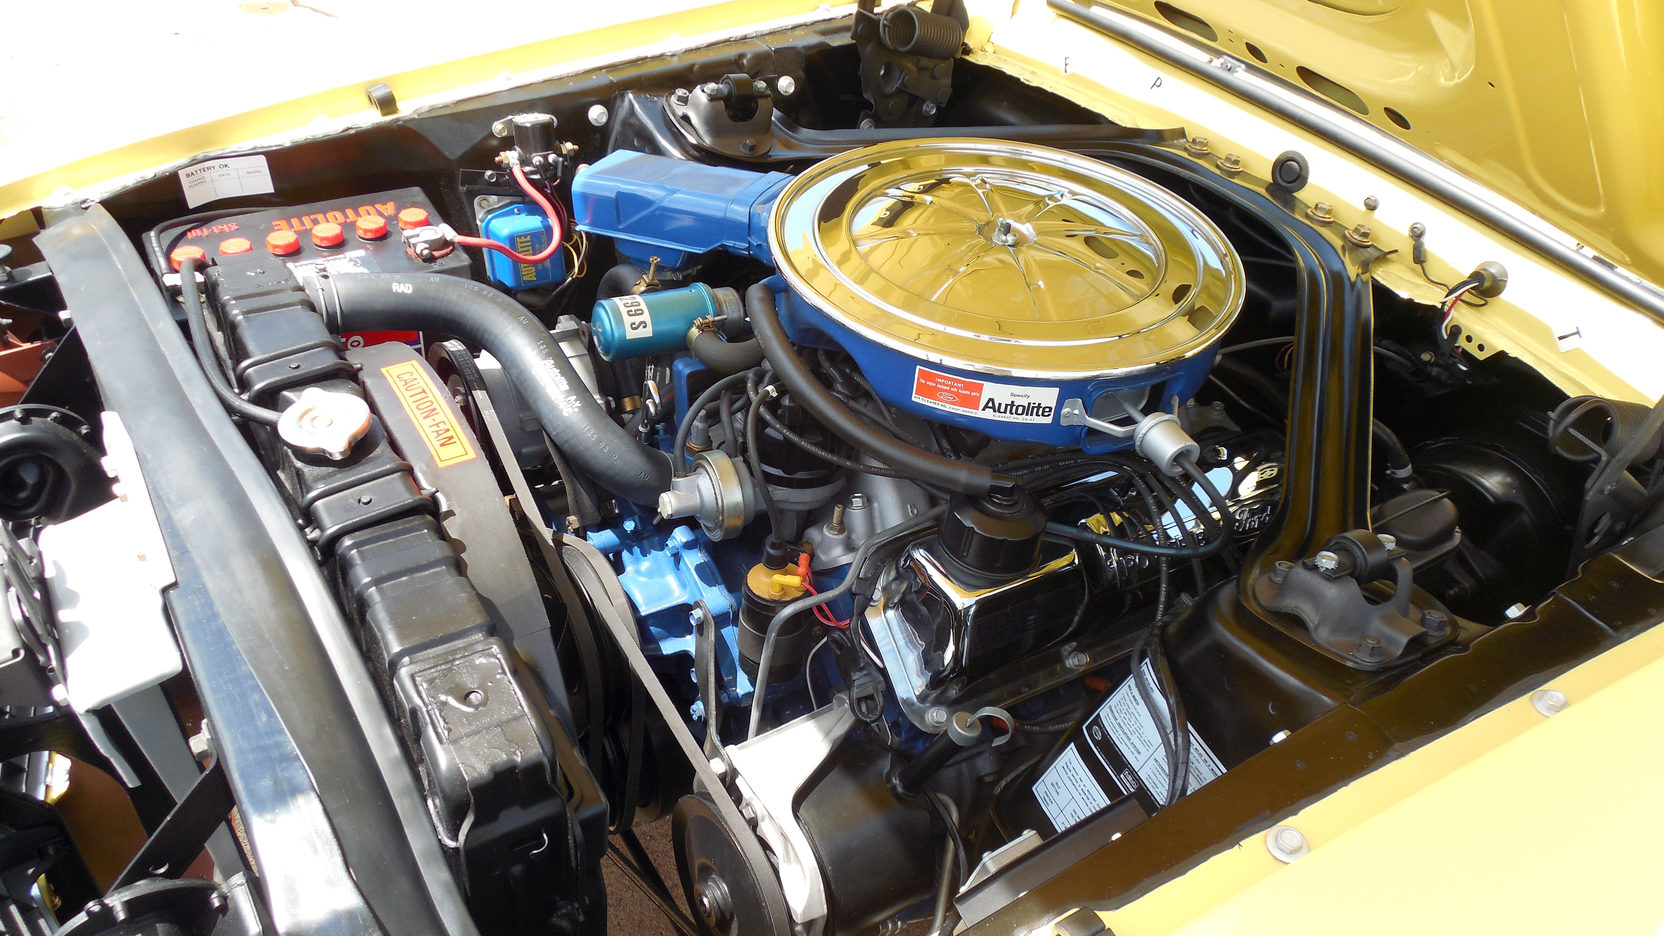 1969 Mustang Engine Information - 302 cubic inch V-8 & Boss 302